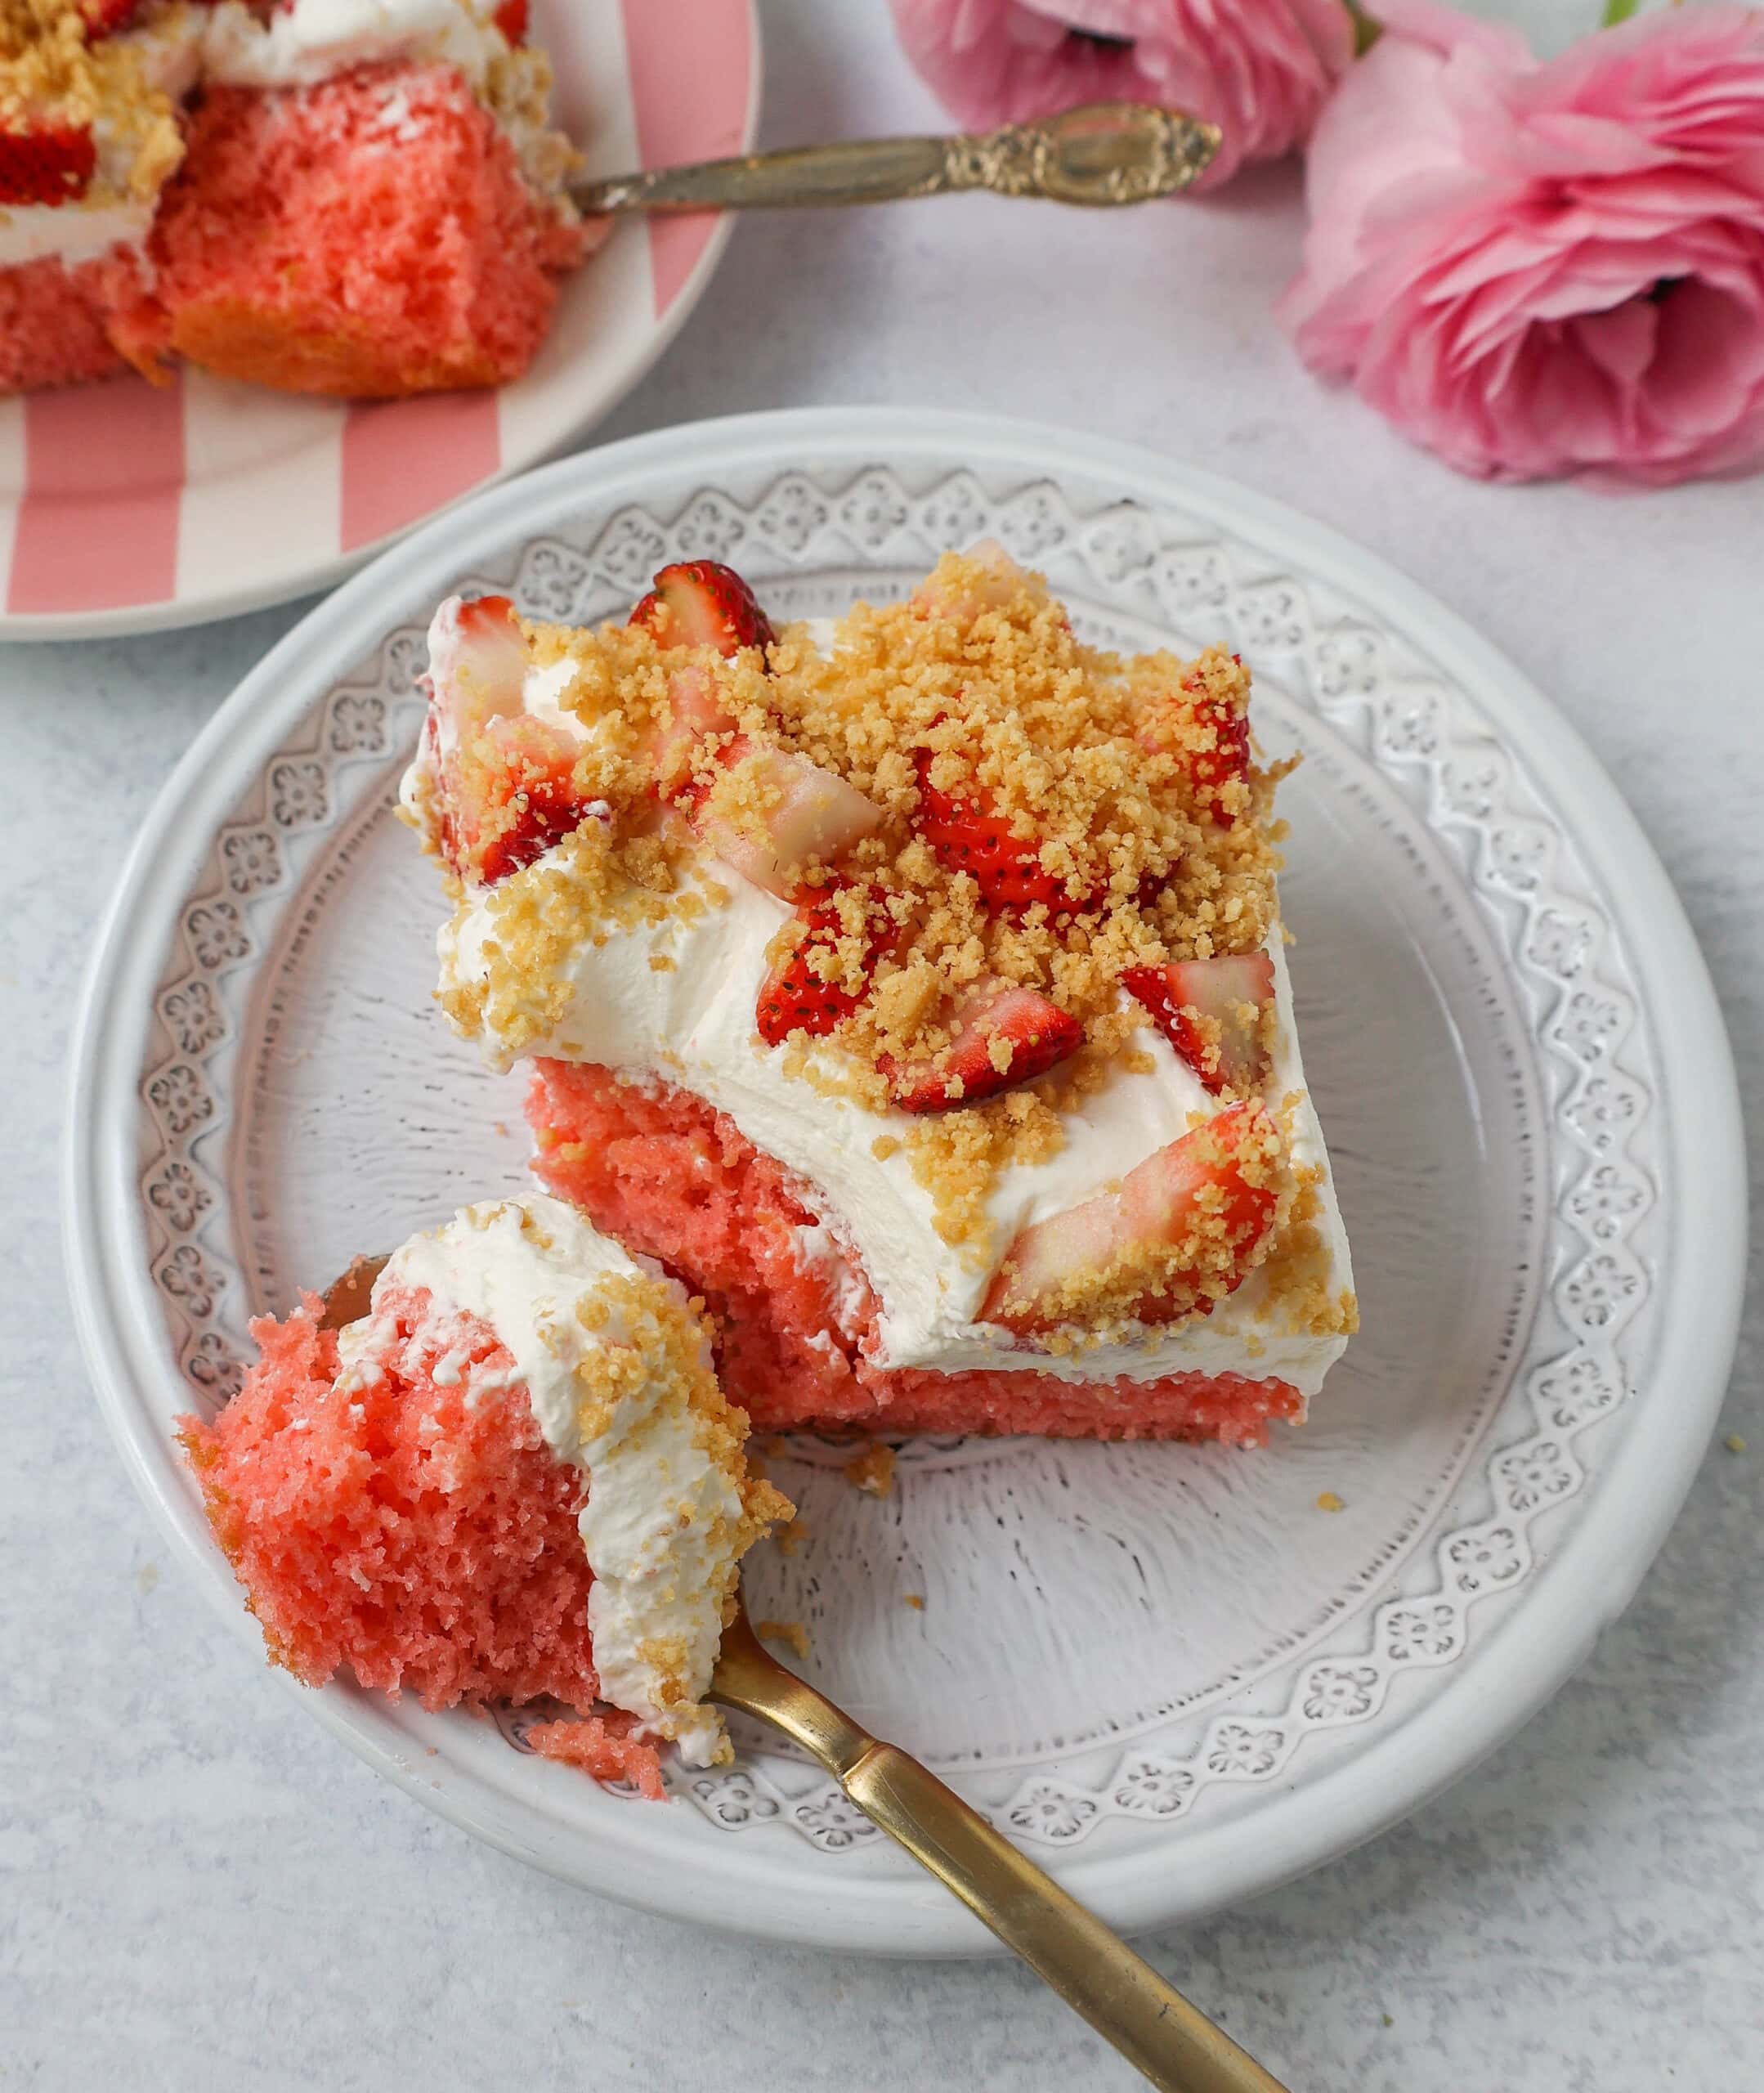 This Strawberry Cream Crunch Cake is a strawberry cake soaked with sweetened condensed milk after baking and topped with fresh sweet whipped cream, fresh strawberries, and crushed golden Oreos for crunch. This strawberry poke cake has it all!